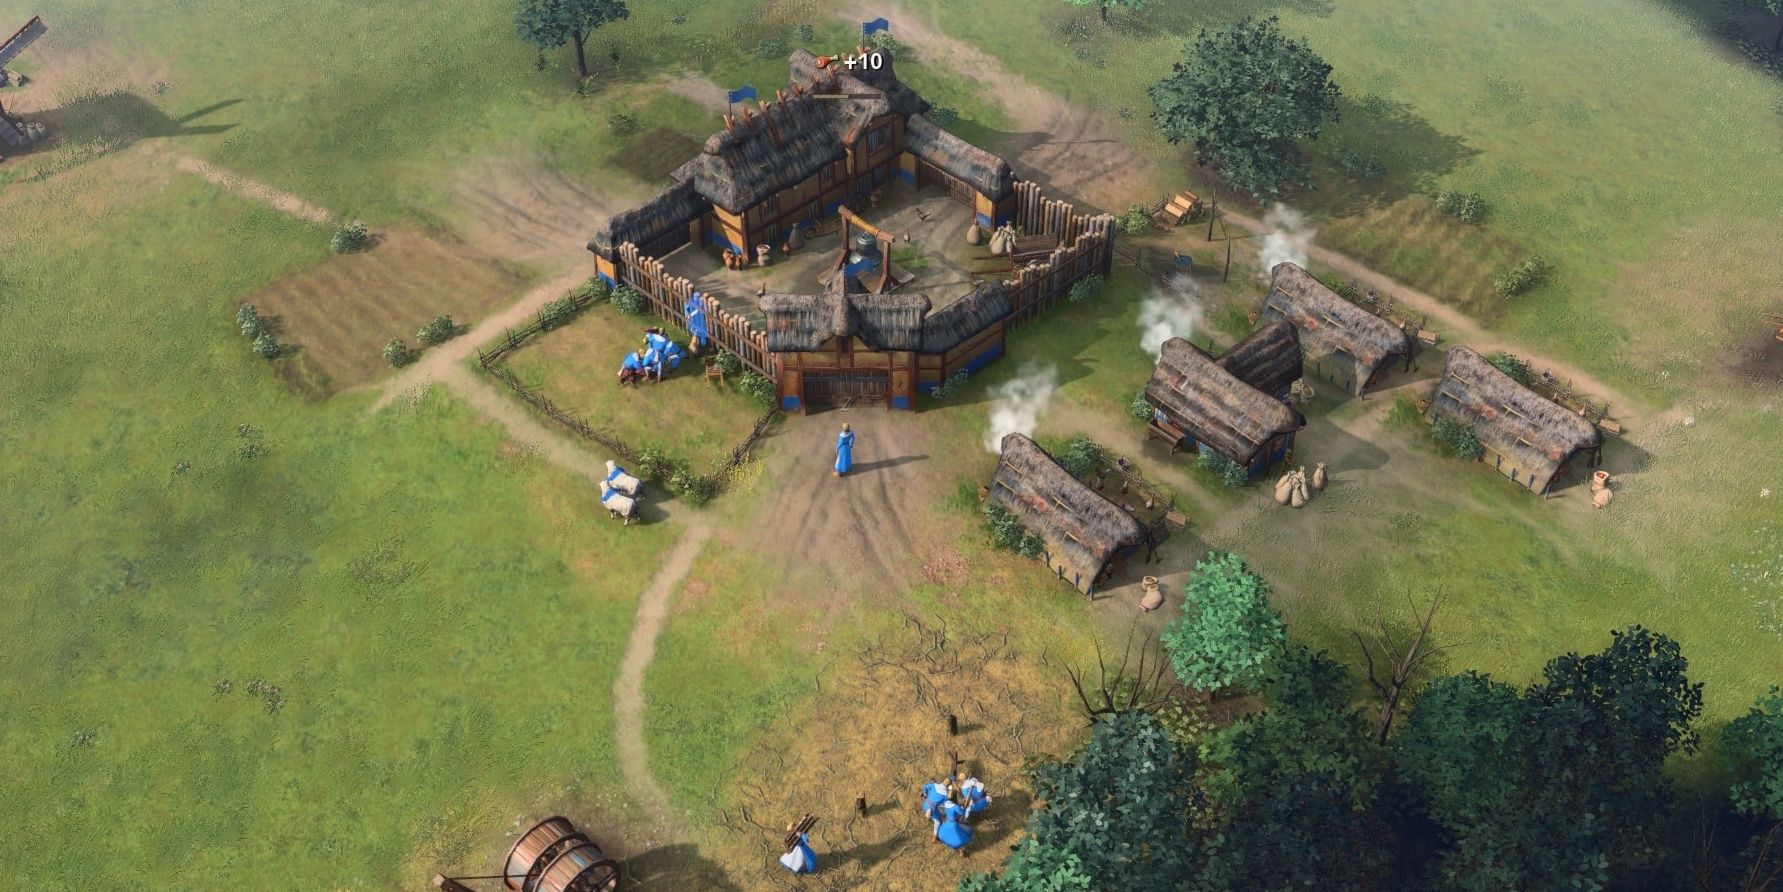 Starting off as the English in Age of Empires IV